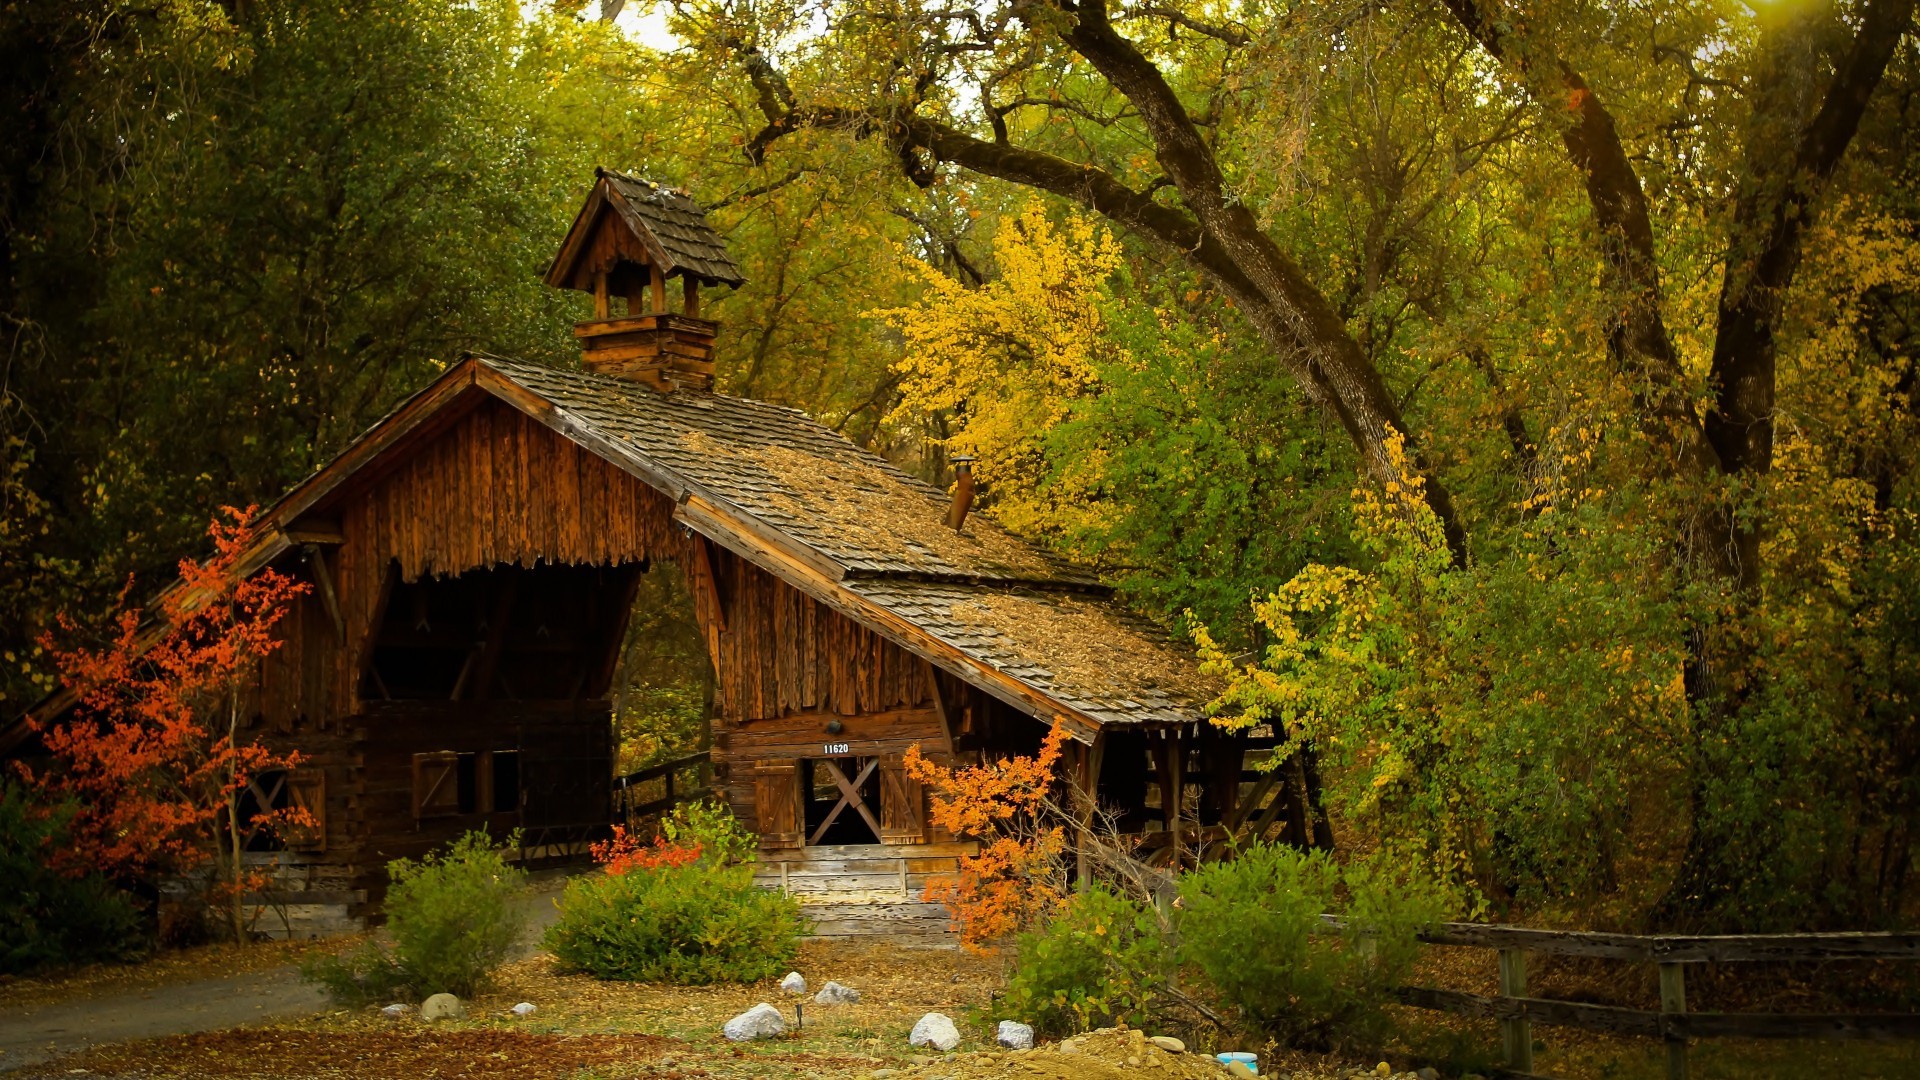 1920x1080 Barn in the woods wallpaper -  (1080p)